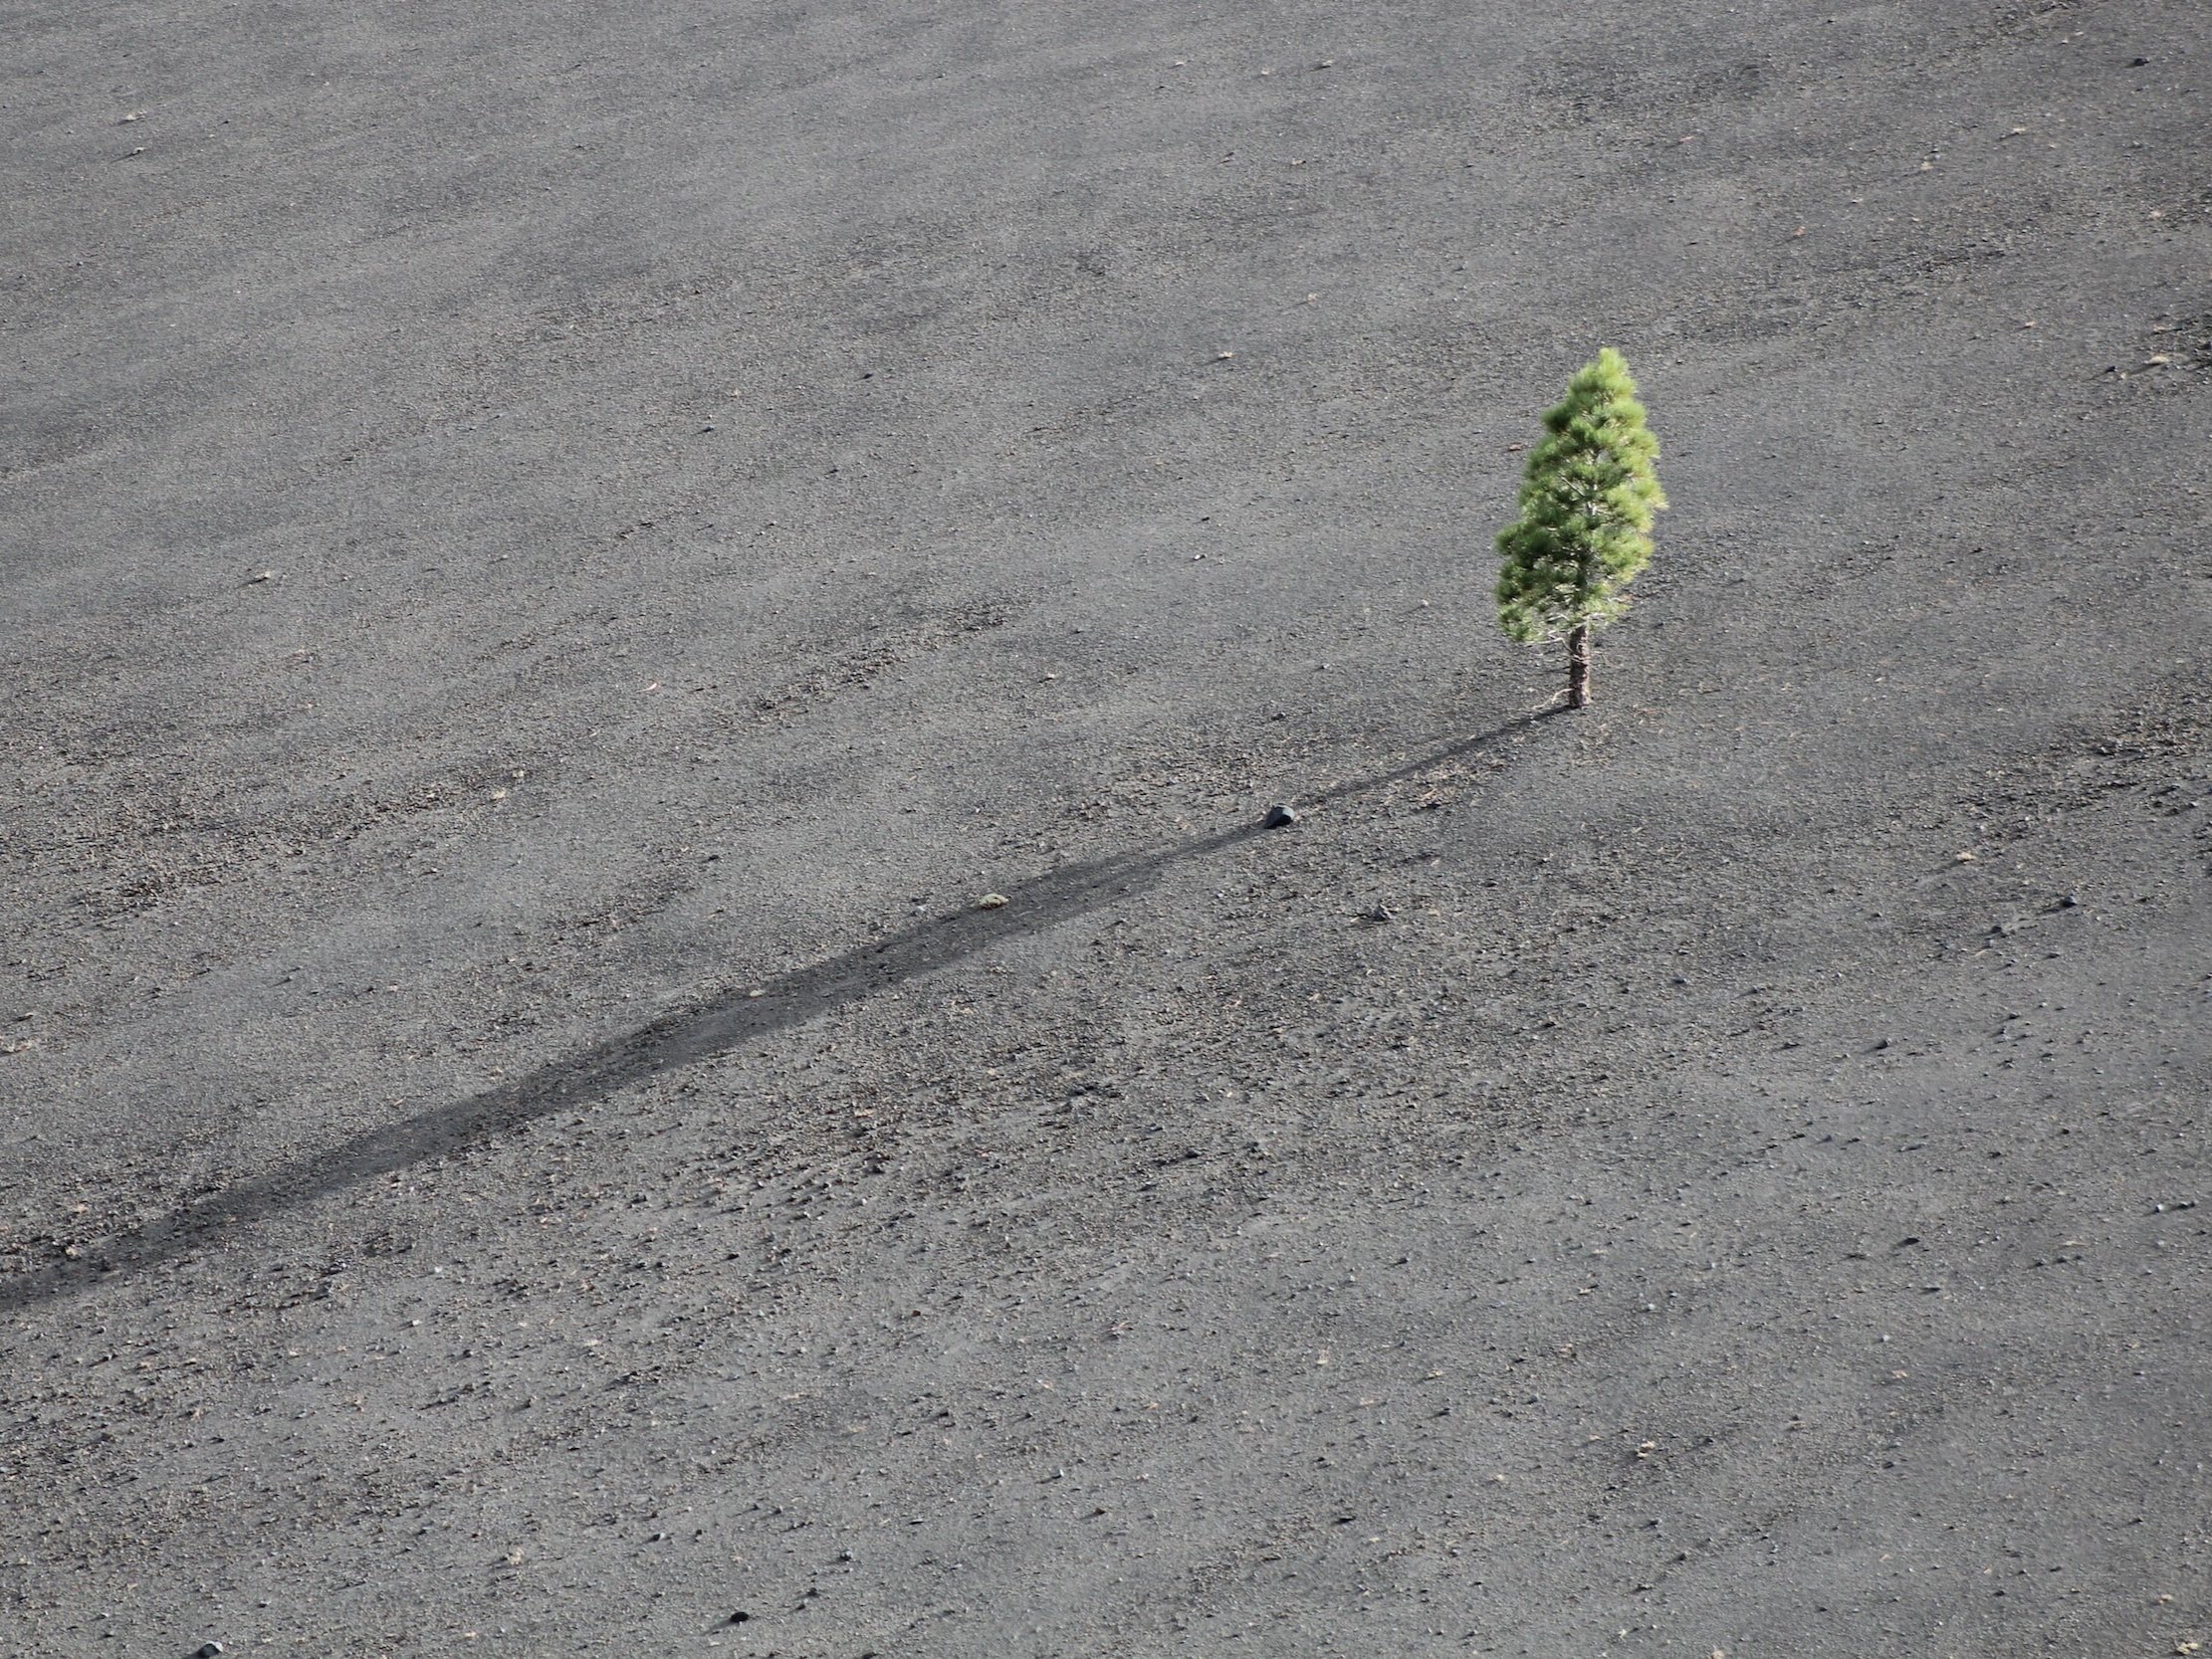 A solitary green tree grows in isolation in a grey, colourless baron landscape.